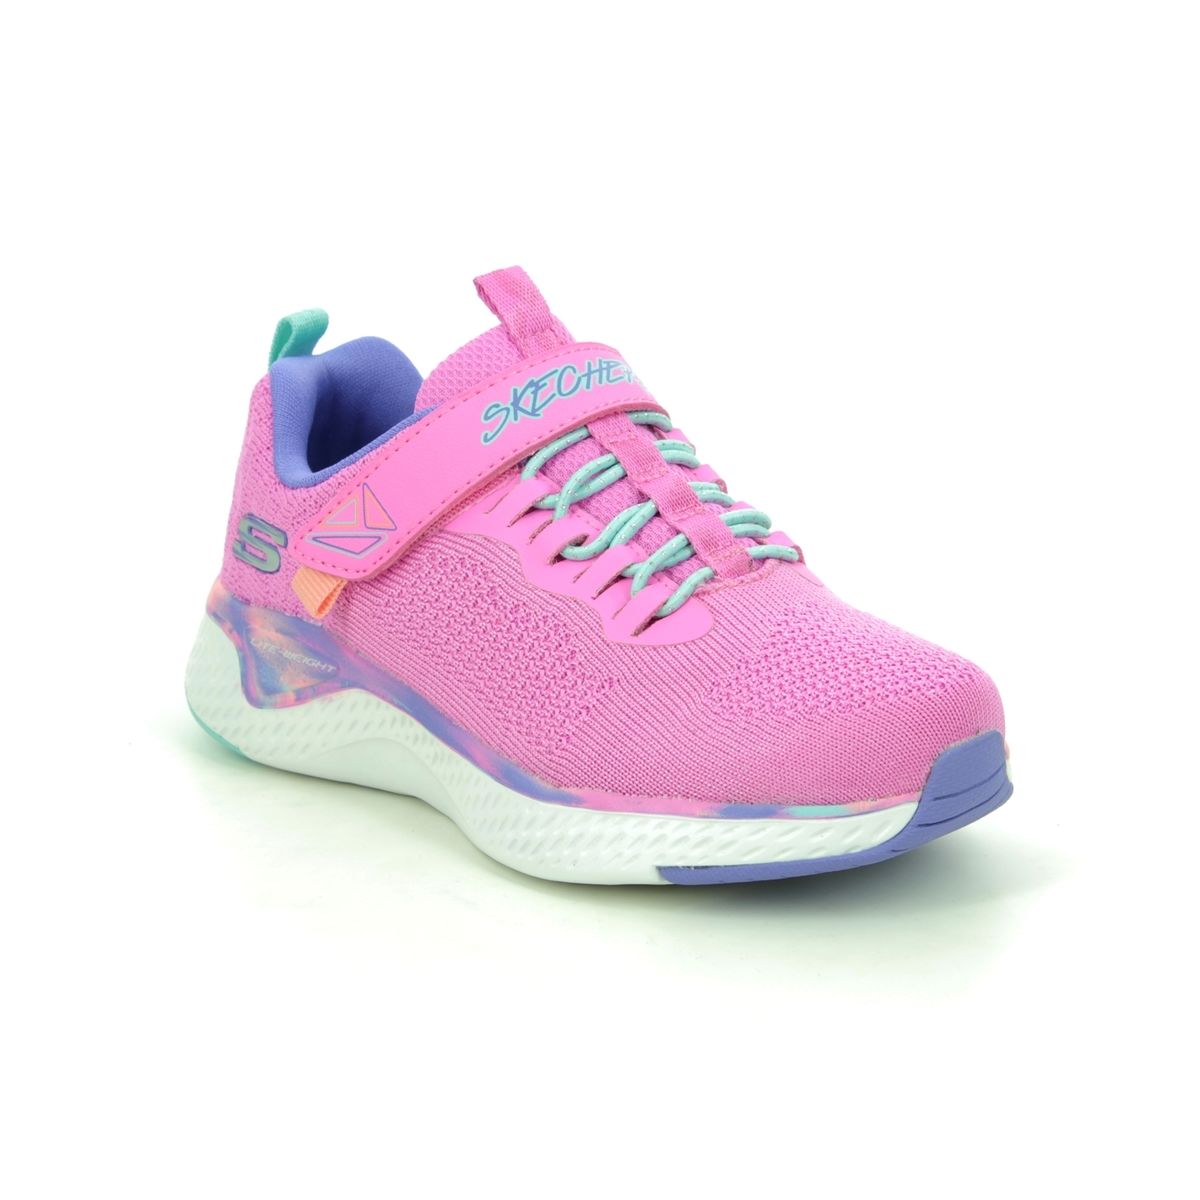 Skechers Solar Fuse Paint Power Pink Kids Girls Trainers 302041L In Size 31 In Plain Pink For kids